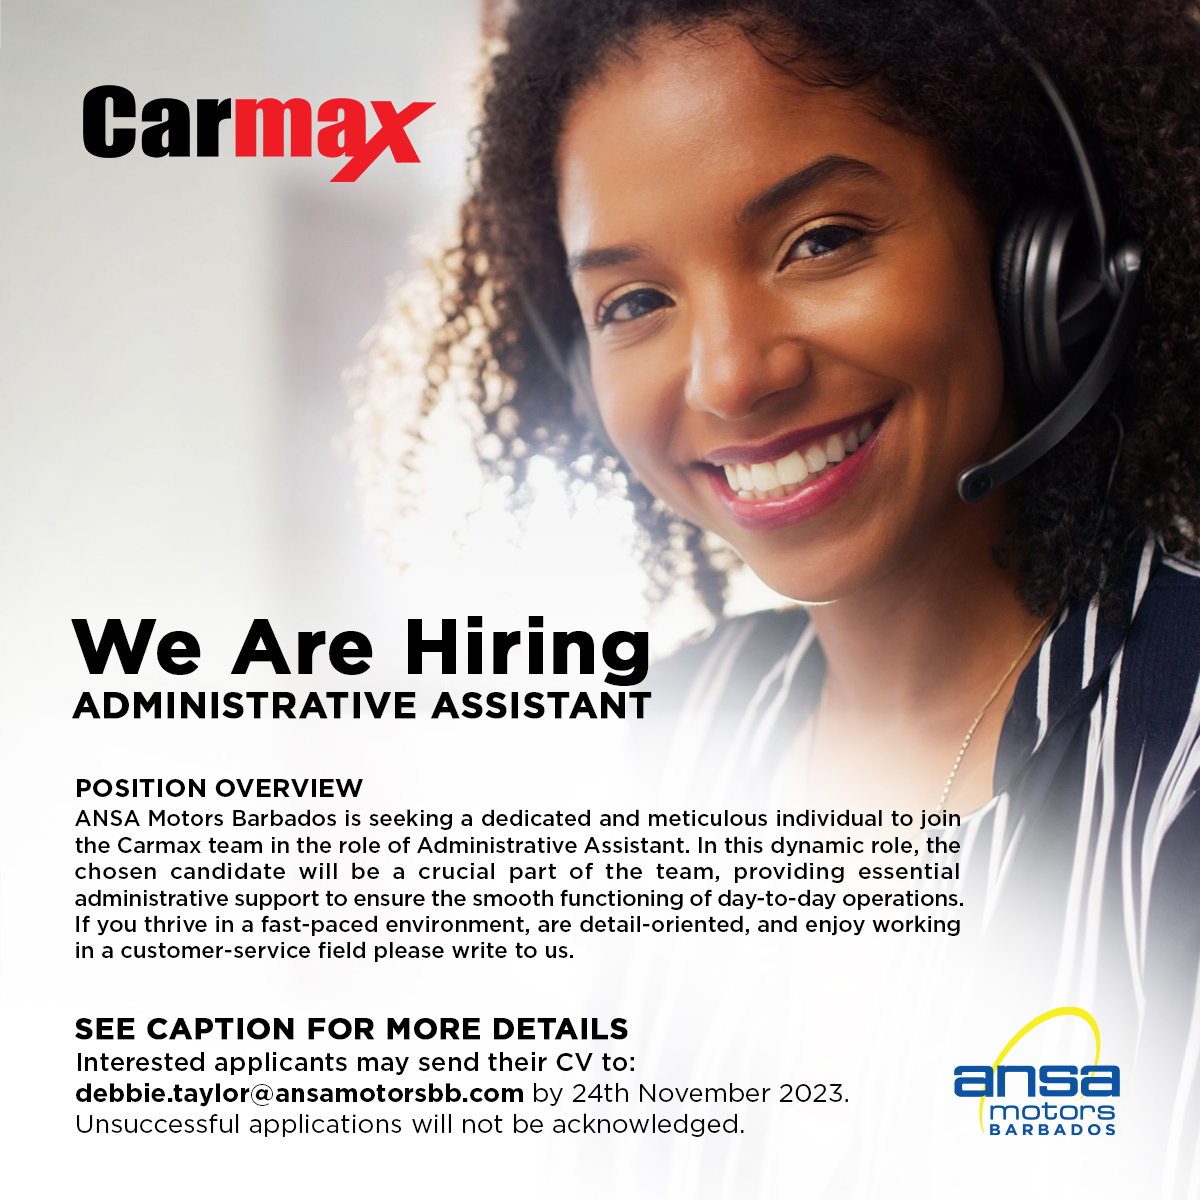 JOB OPPORTUNITY: ADMINISTRATIVE ASSISTANT